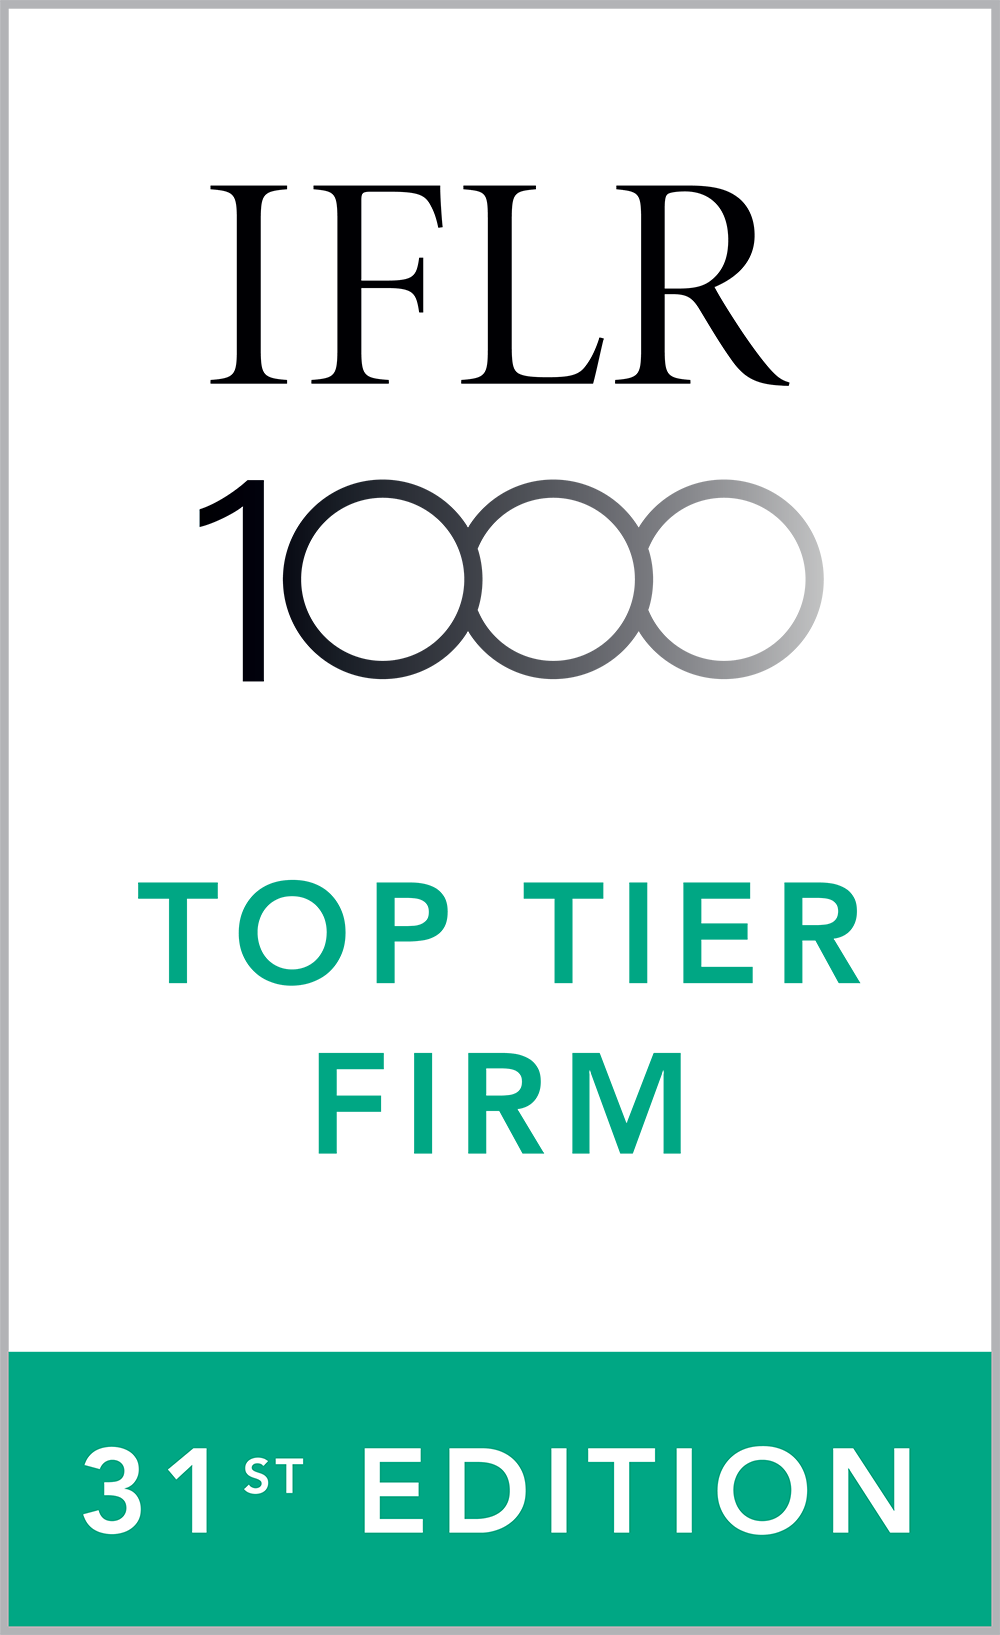 top tier firm 31st edition